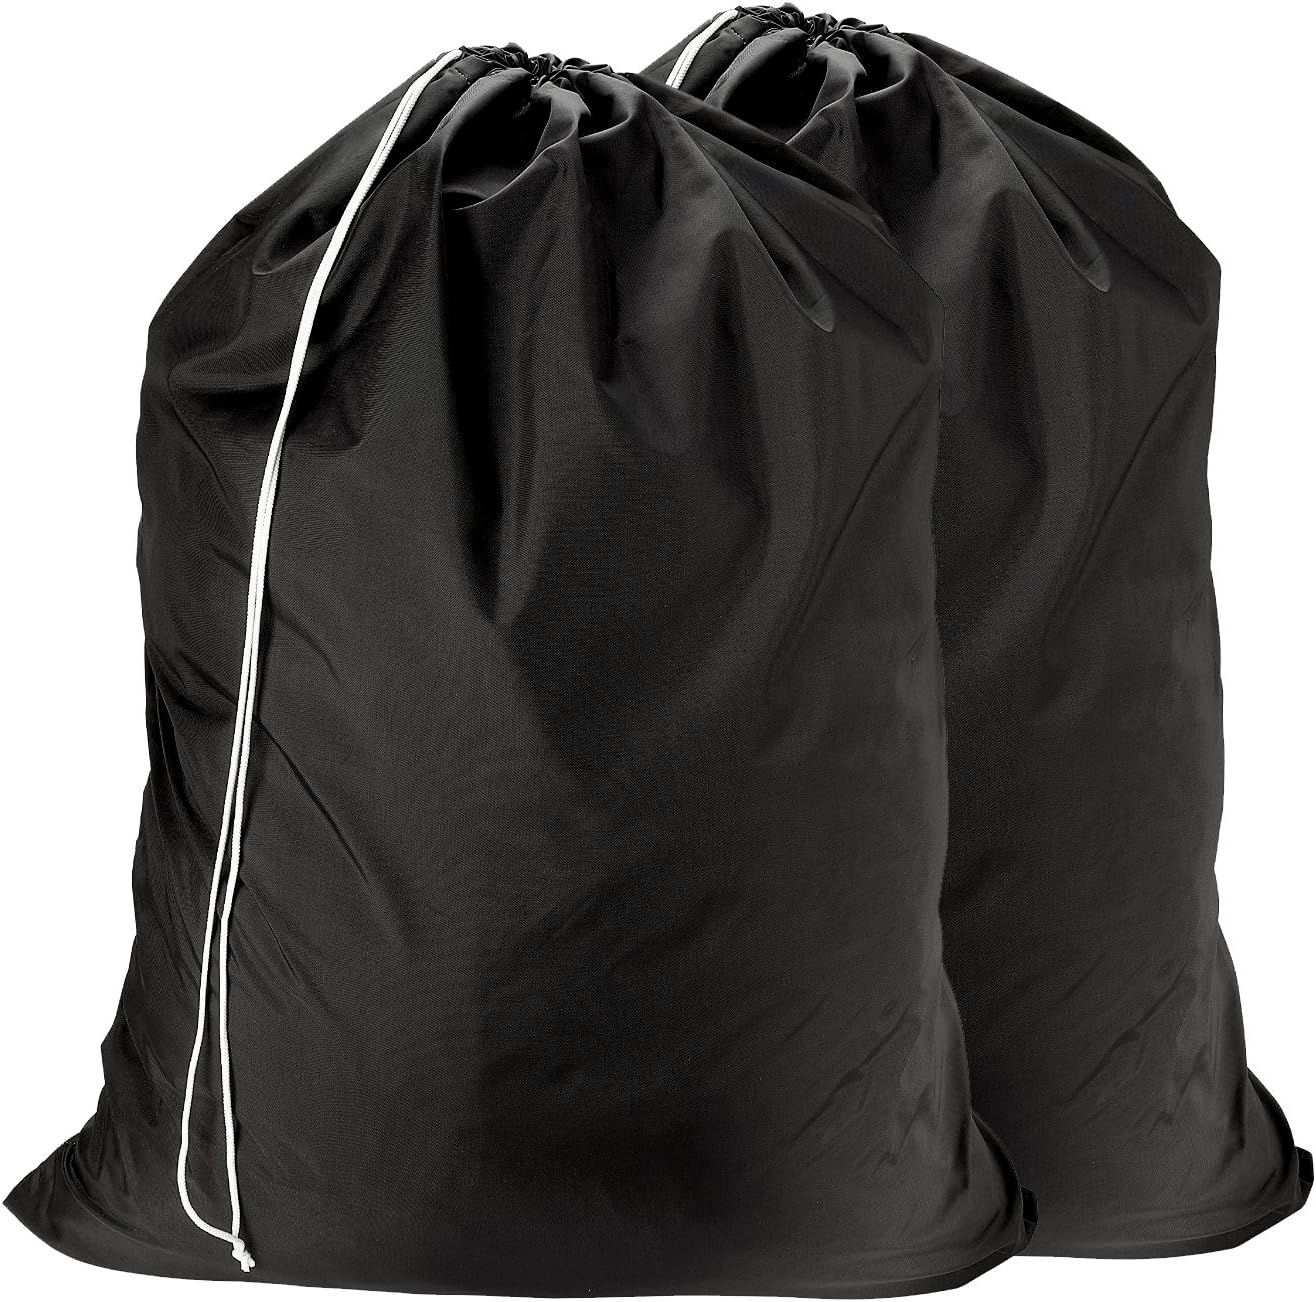 I use one bag for home laundry and one for travel. I was surprised by the weight of the material and being so well made. I would recommend to others.